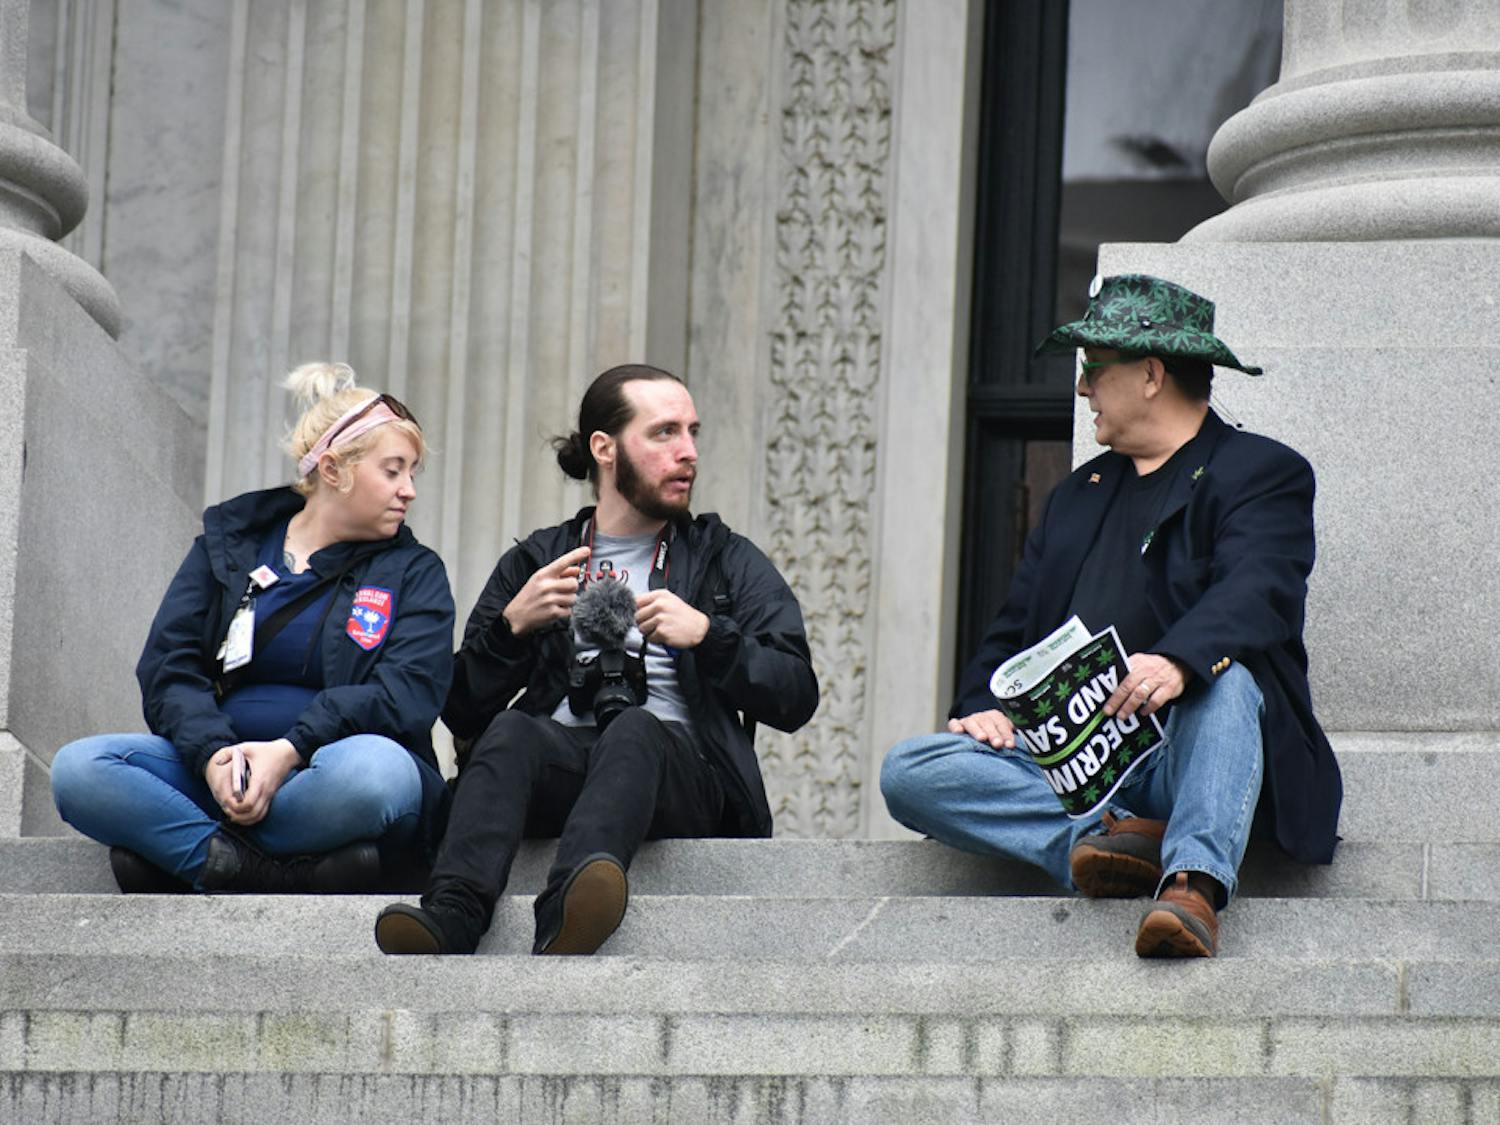 Representatives of South Carolina NORML went around the Statehouse grounds to inform others about their mission. Scott Weldon (far right) experienced the beginning of the Nixon Administration’s “War on Drugs” and is the executive director of NORML.